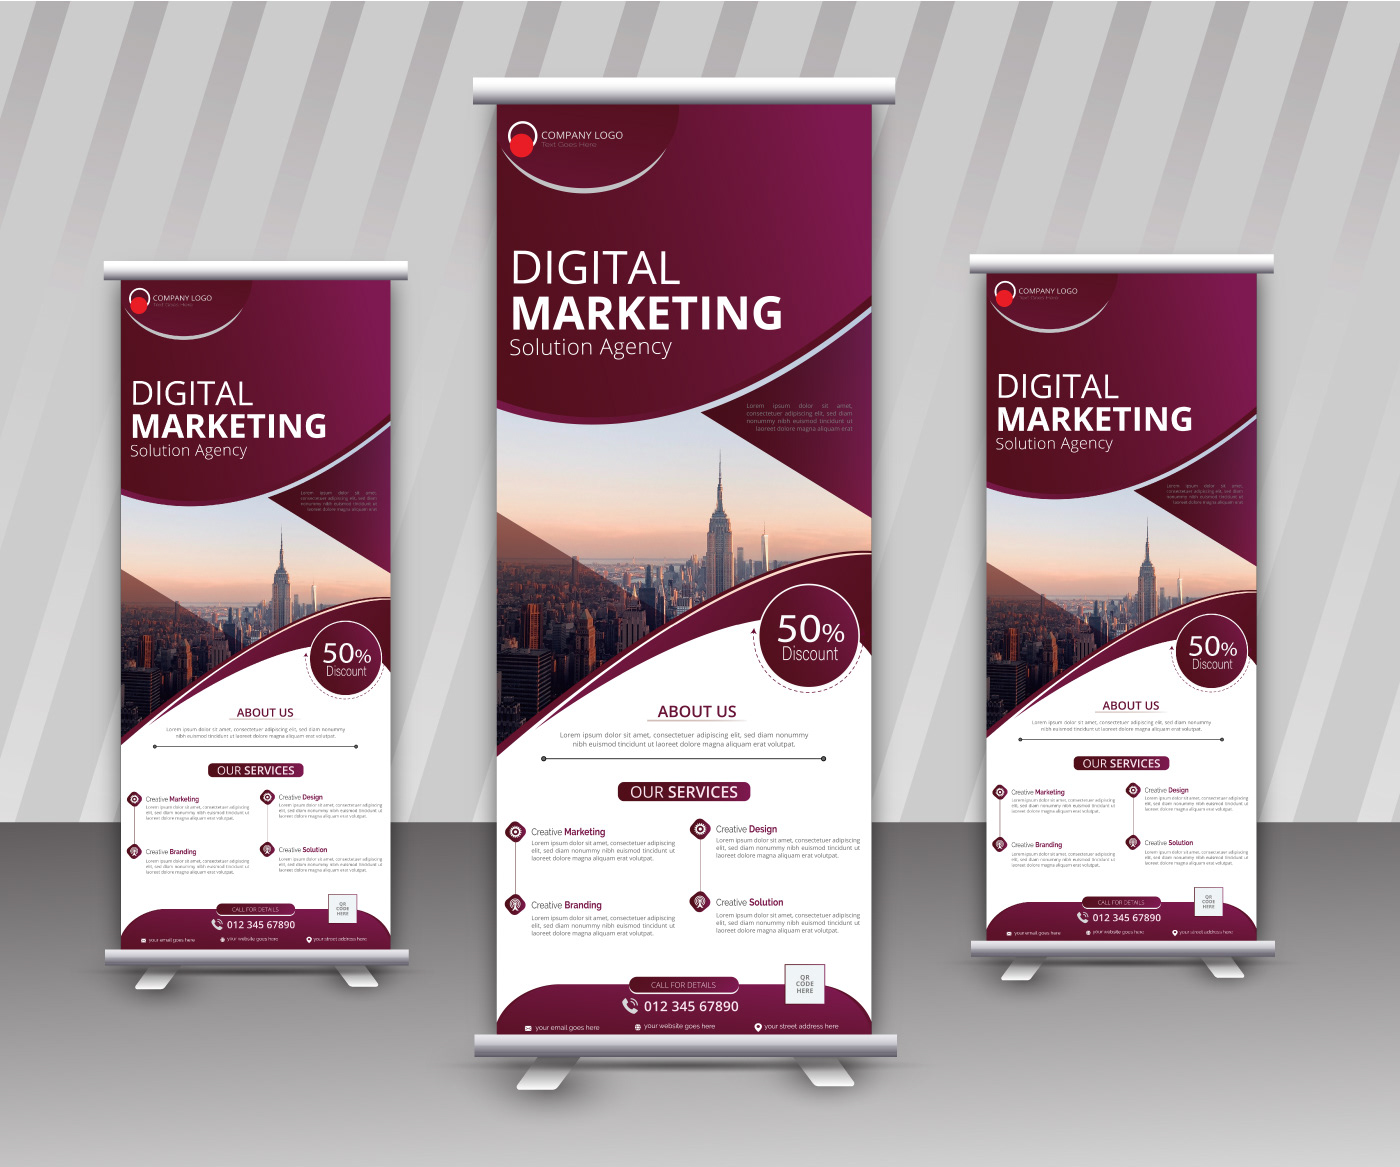 rollup banner roll up design Roll Up banner design Social media post brand roll out roll up banner flyer business roll up Roll up banner template